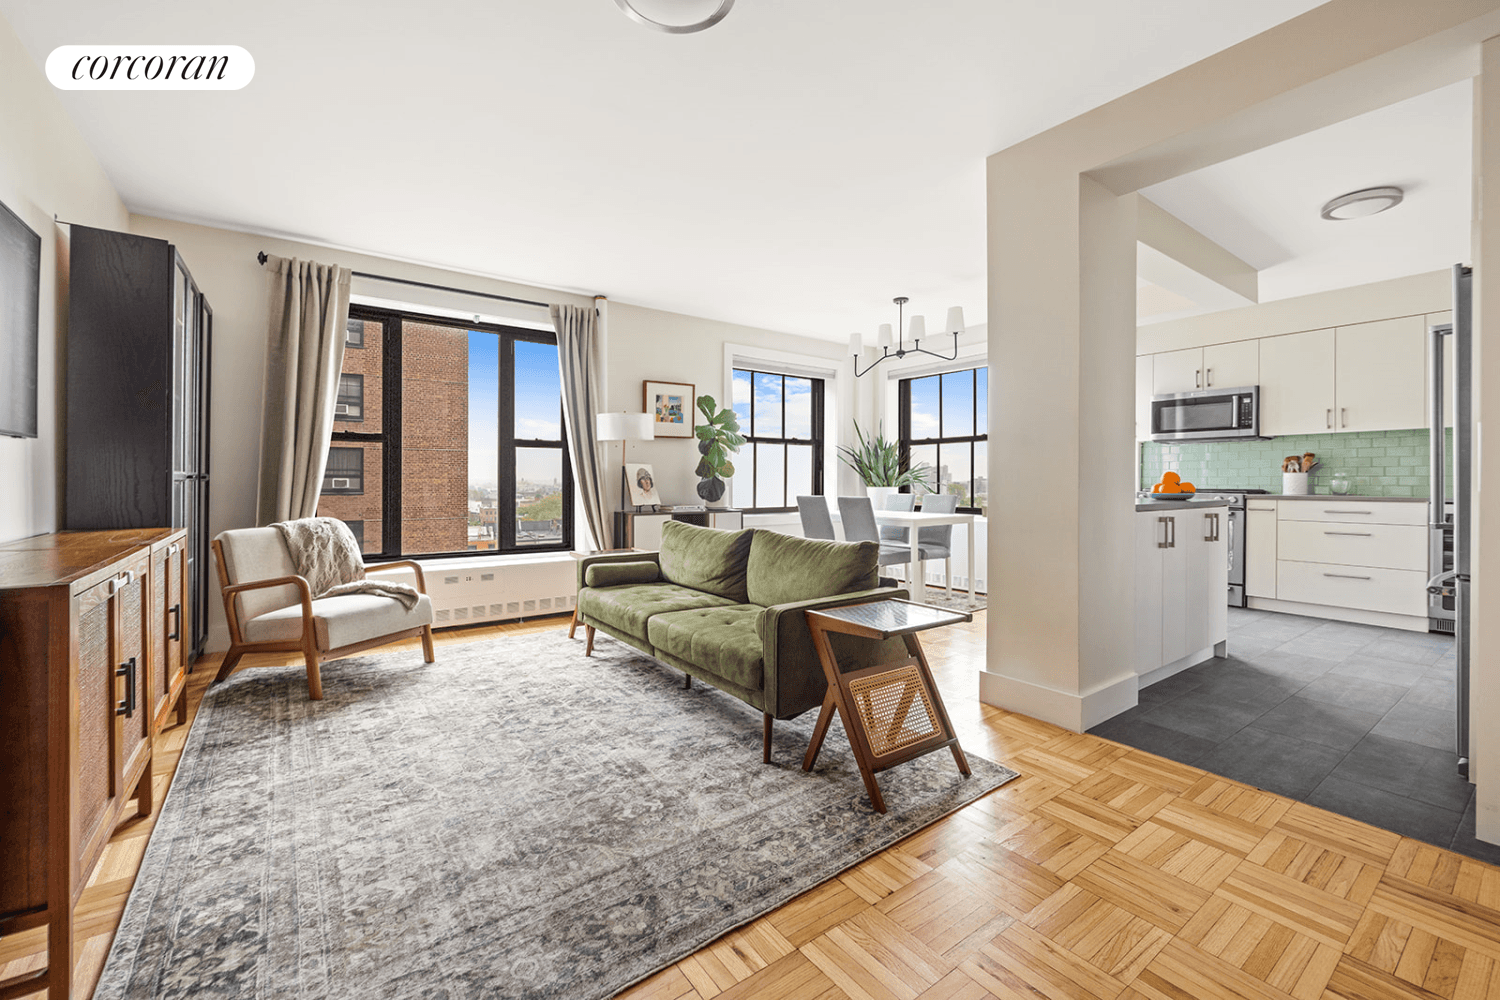 This flawlessly renovated, corner one bedroom home has six oversized windows with eastern and southern exposures, providing bright sun and unobstructed views over brownstone Brooklyn.